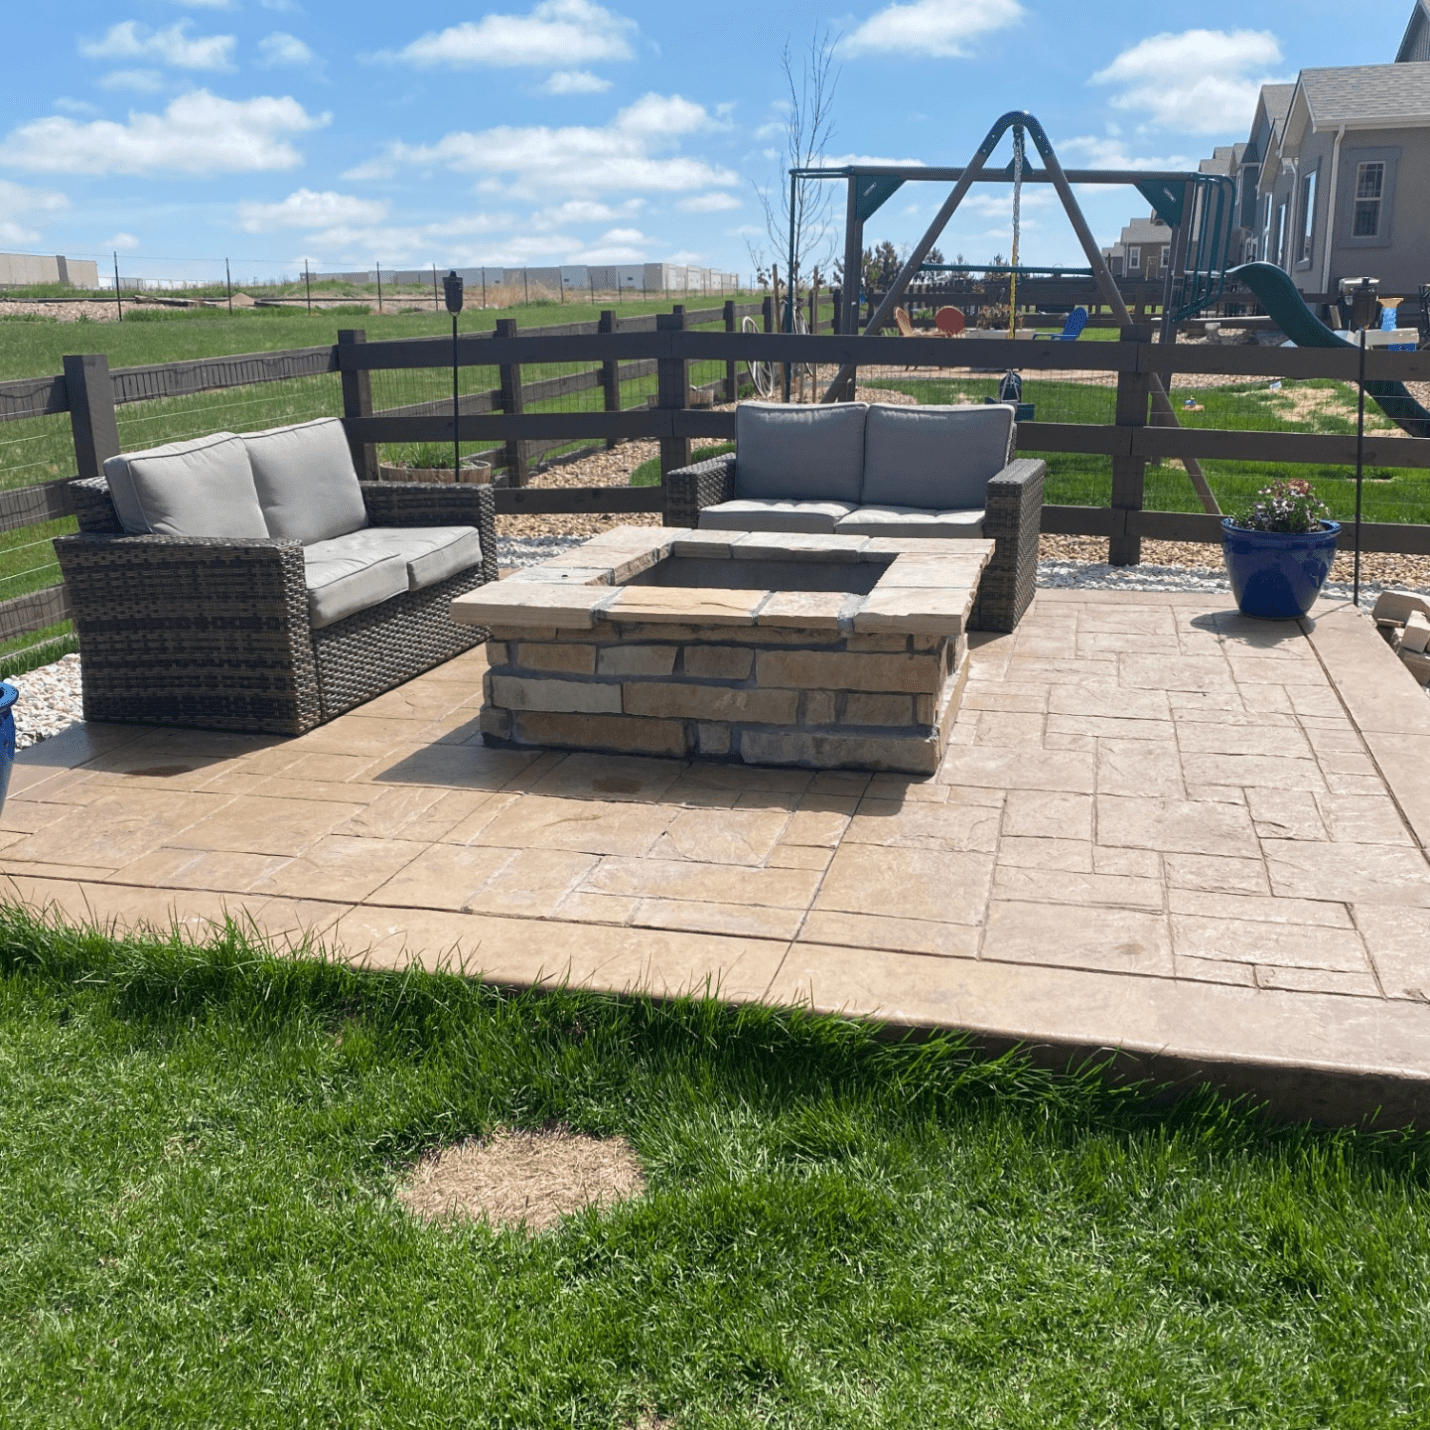 Do Outdoor Living Spaces Add Value to Your Home?